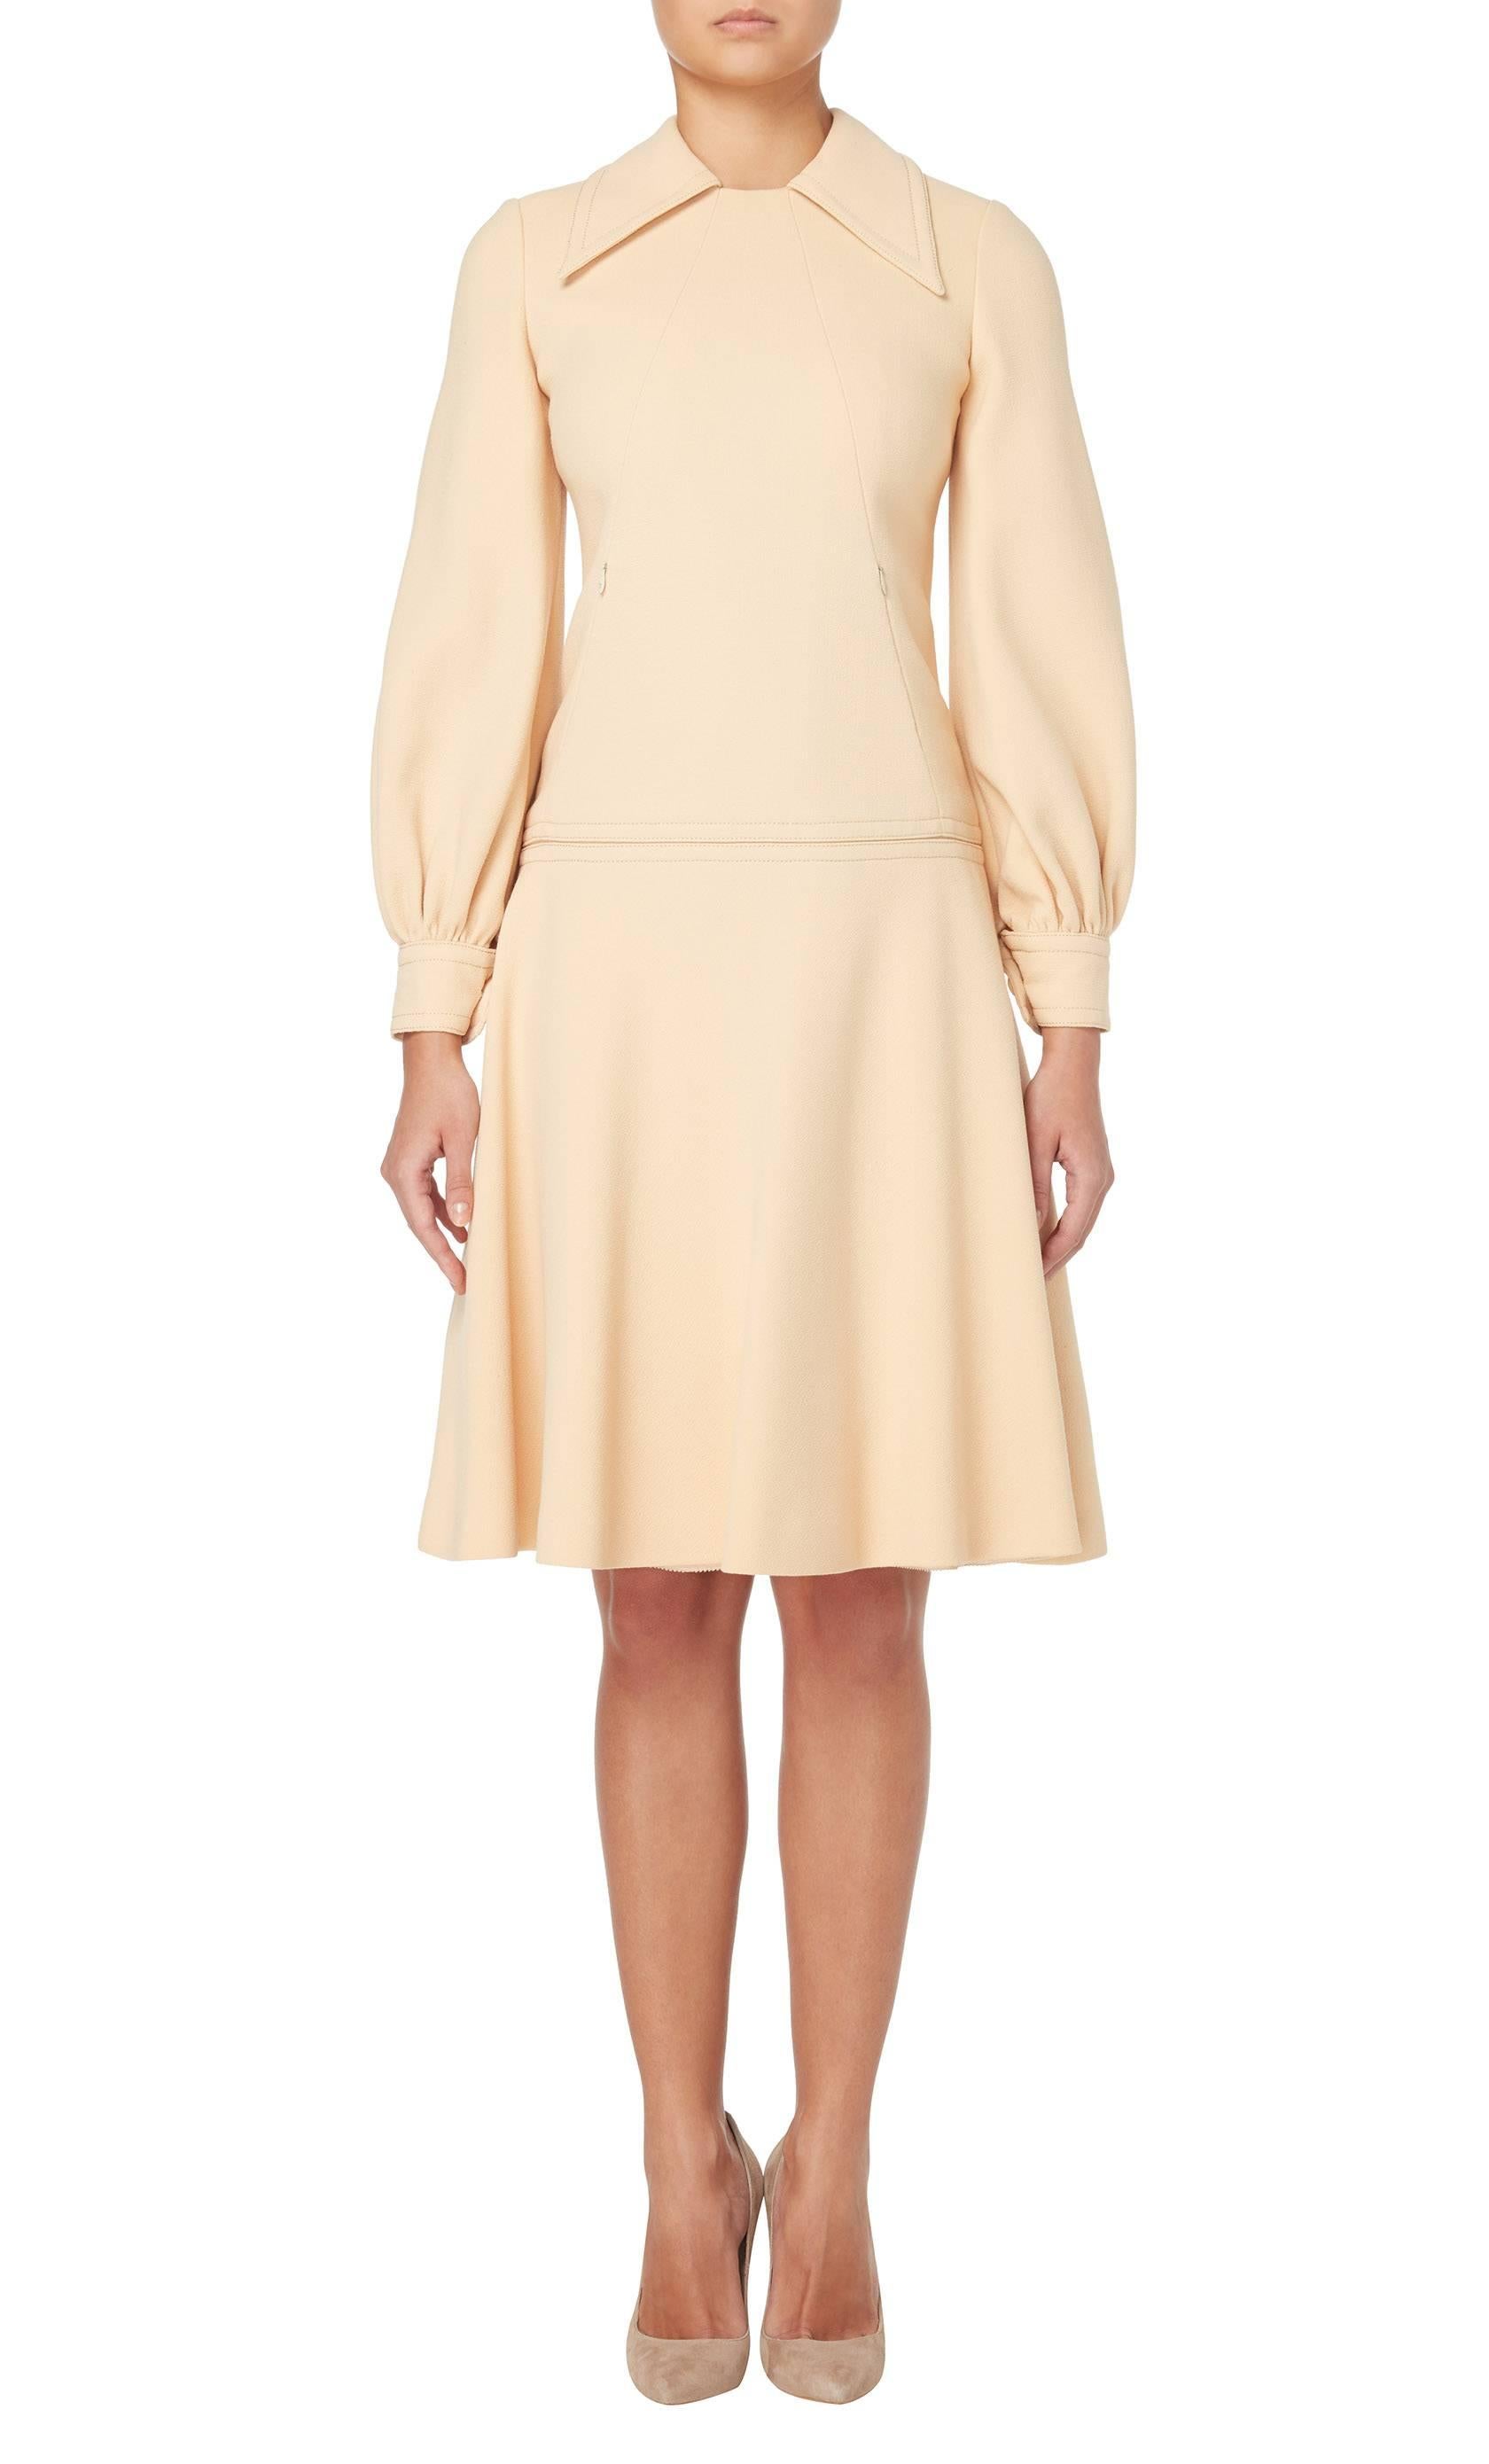 Constructed in apricot coloured wool, this dress will work for the office and daytime occasion alike. Featuring an exaggerated collar and long sleeves, the dress has a drop-waist silhouette and a wide skirt. Zip pockets sit on the waist while the